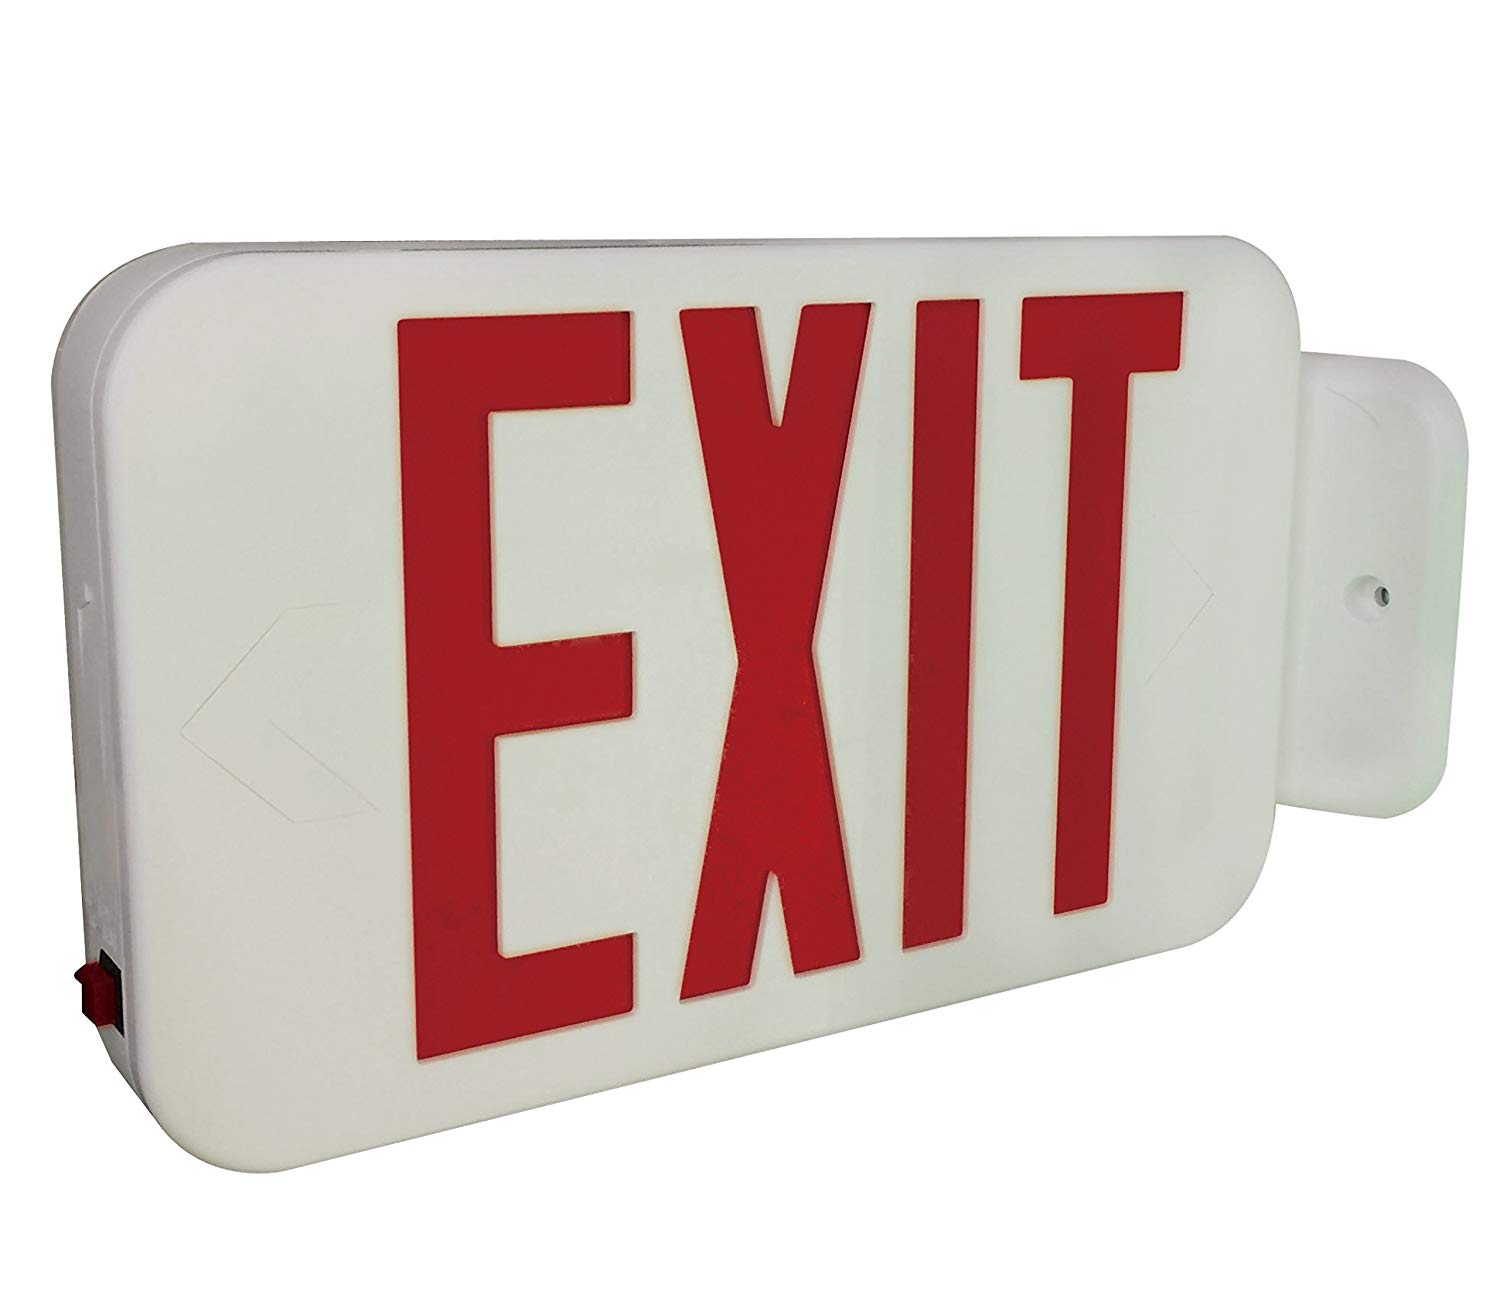 LIT-PaTH Double Face LED Combo Emergency EXIT Sign And Back Up Batteries- US Standard Red Letter Emergency Exit Lighting, UL 924 And CEC Qualified, 120-277 Voltage (1-Pack)